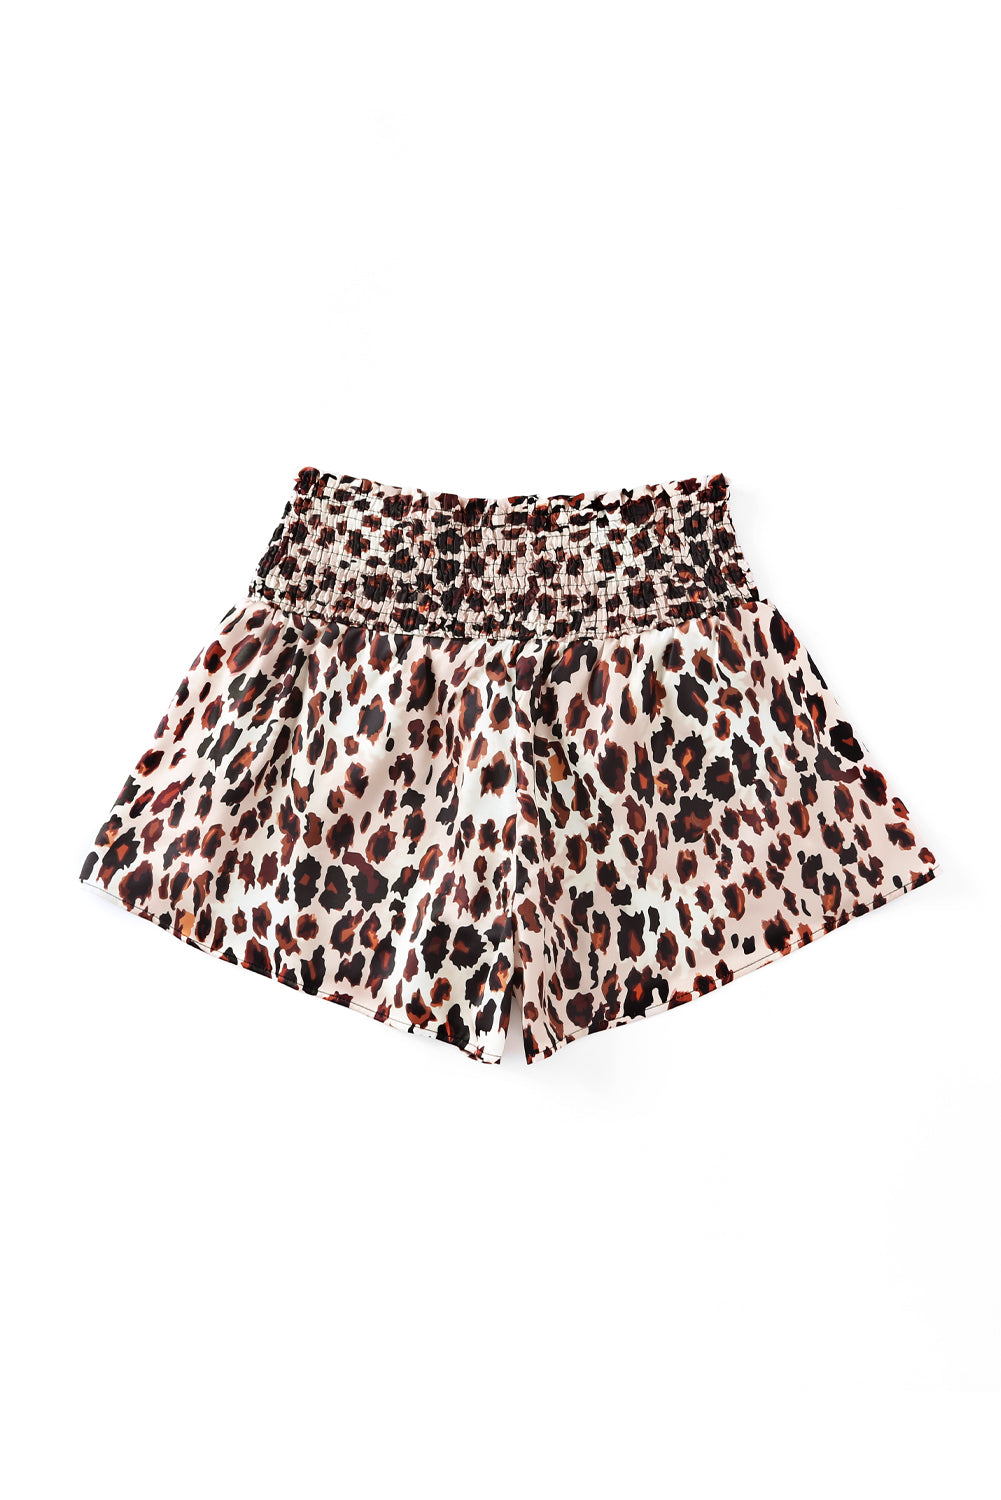 LC731257-20-S, LC731257-20-M, LC731257-20-L, LC731257-20-XL, Leopard  Print Smocked Waistband High Waist Casual Shorts